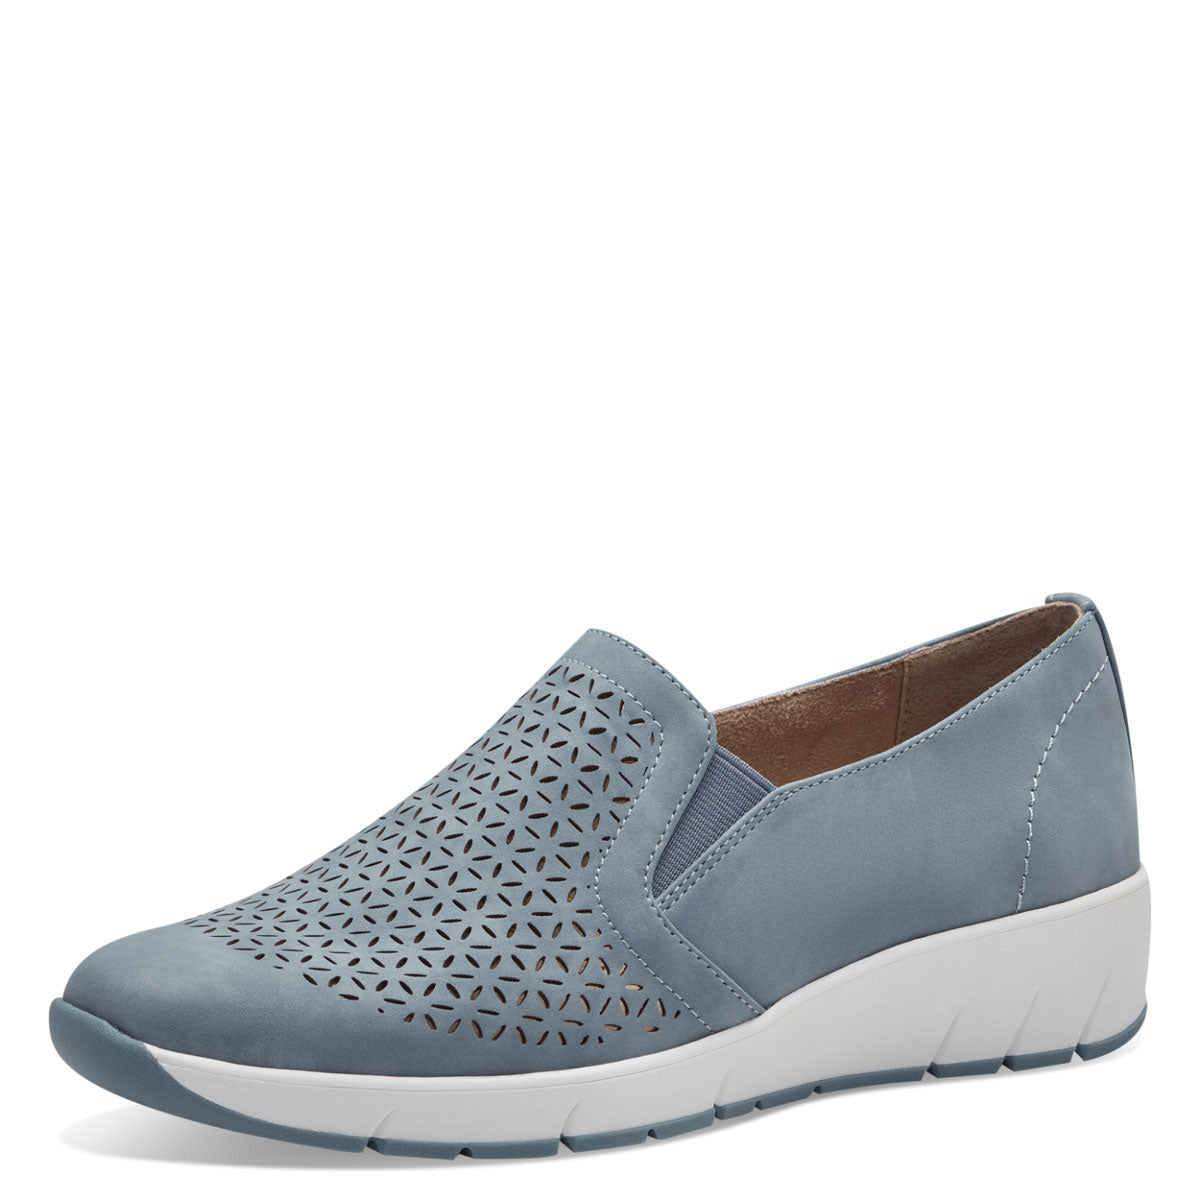 Front view of Jana Dusty Blue Slip-On with white sole.